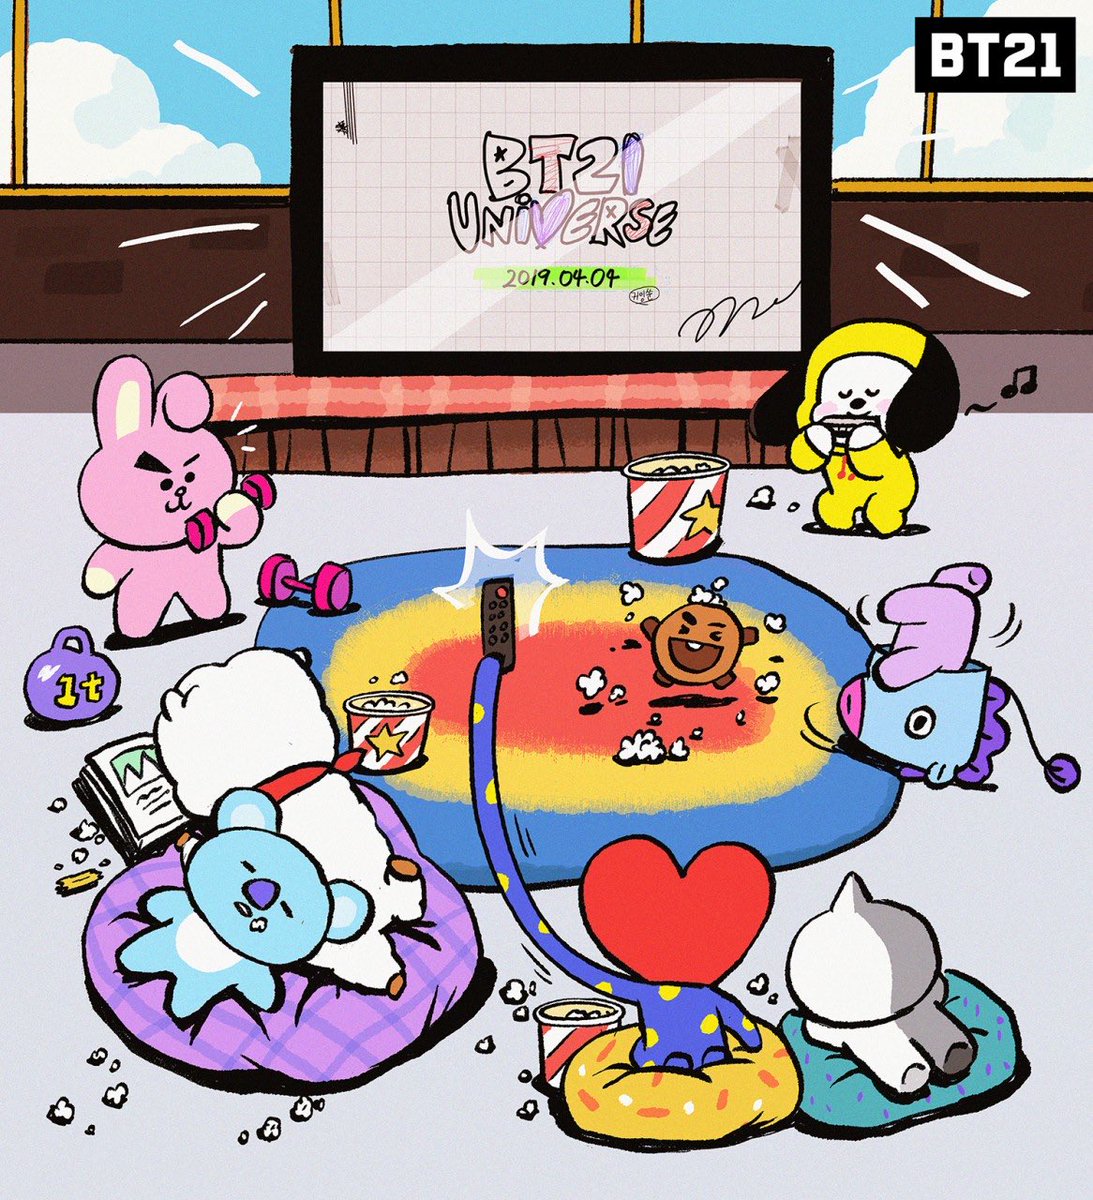 8 different ways to wait for your favorite series 🍿

D-2 till the first episode! ! 🎬 
Mark your calendar every Thursday!
👉  lin.ee/5sOg2Uv  
#BT21_UNIVERSE #ComingSoon #April4th #EveryThursday #BT21